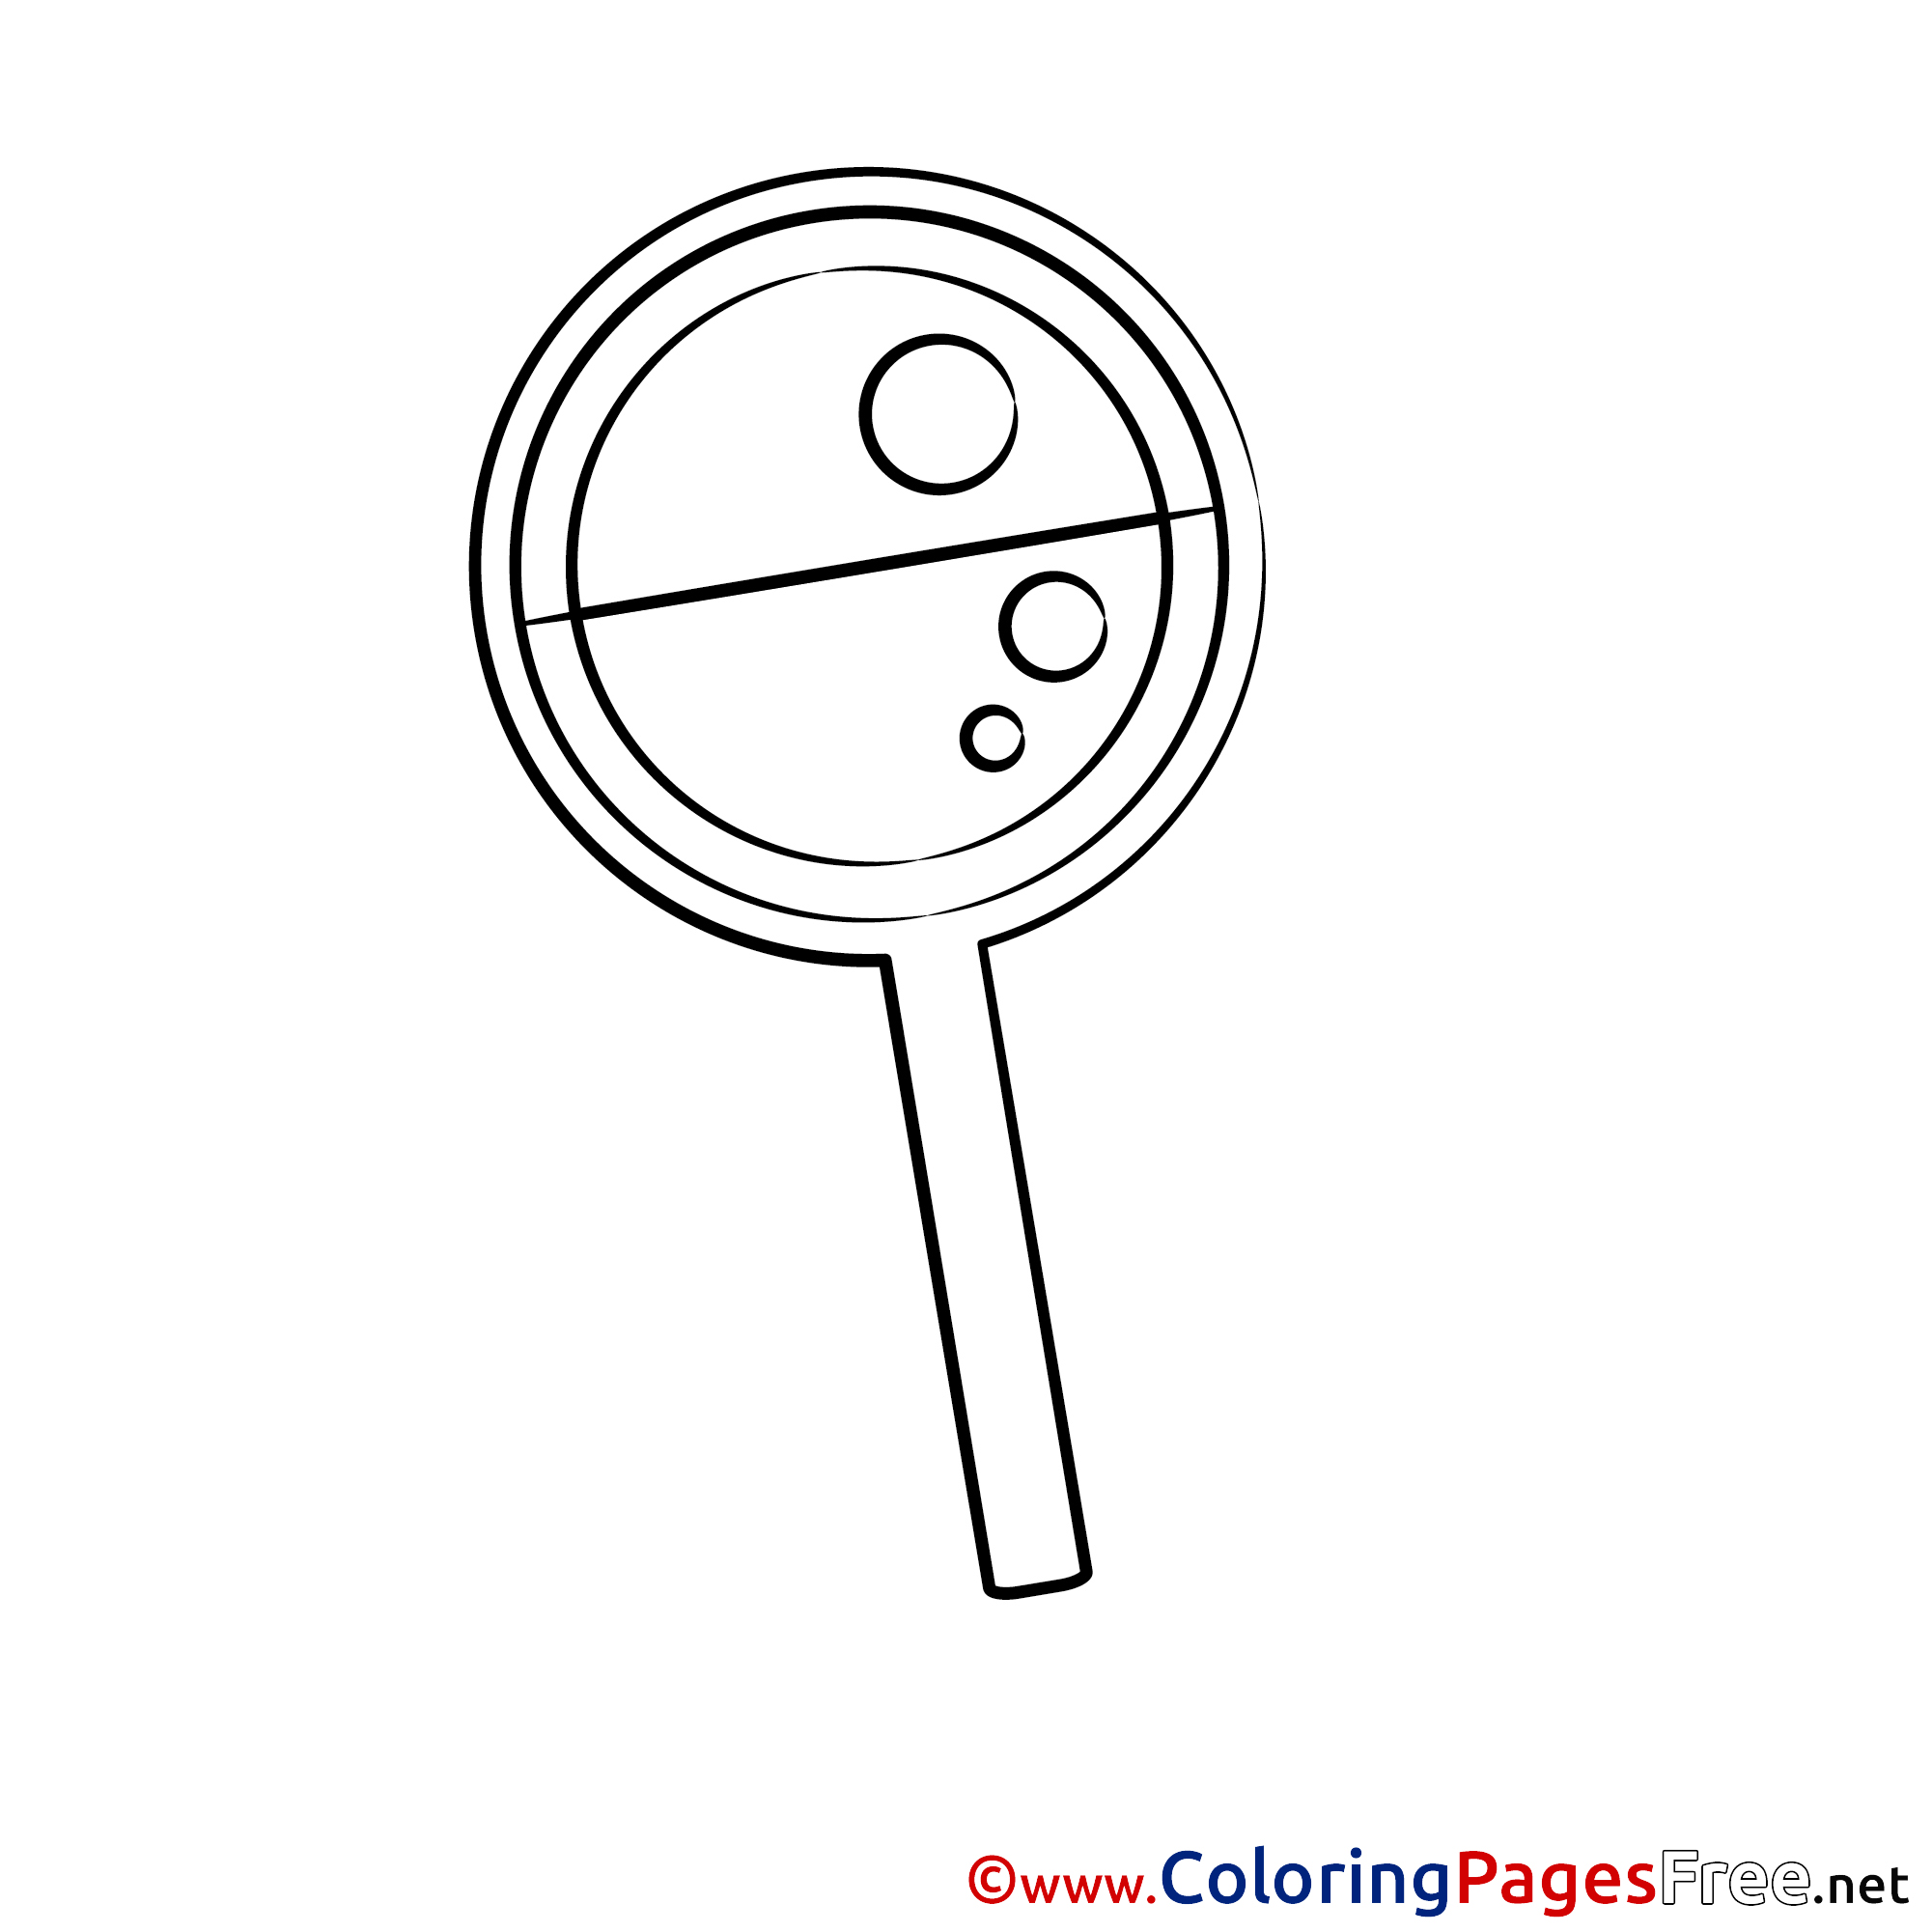 Lollipop free Colouring Page download